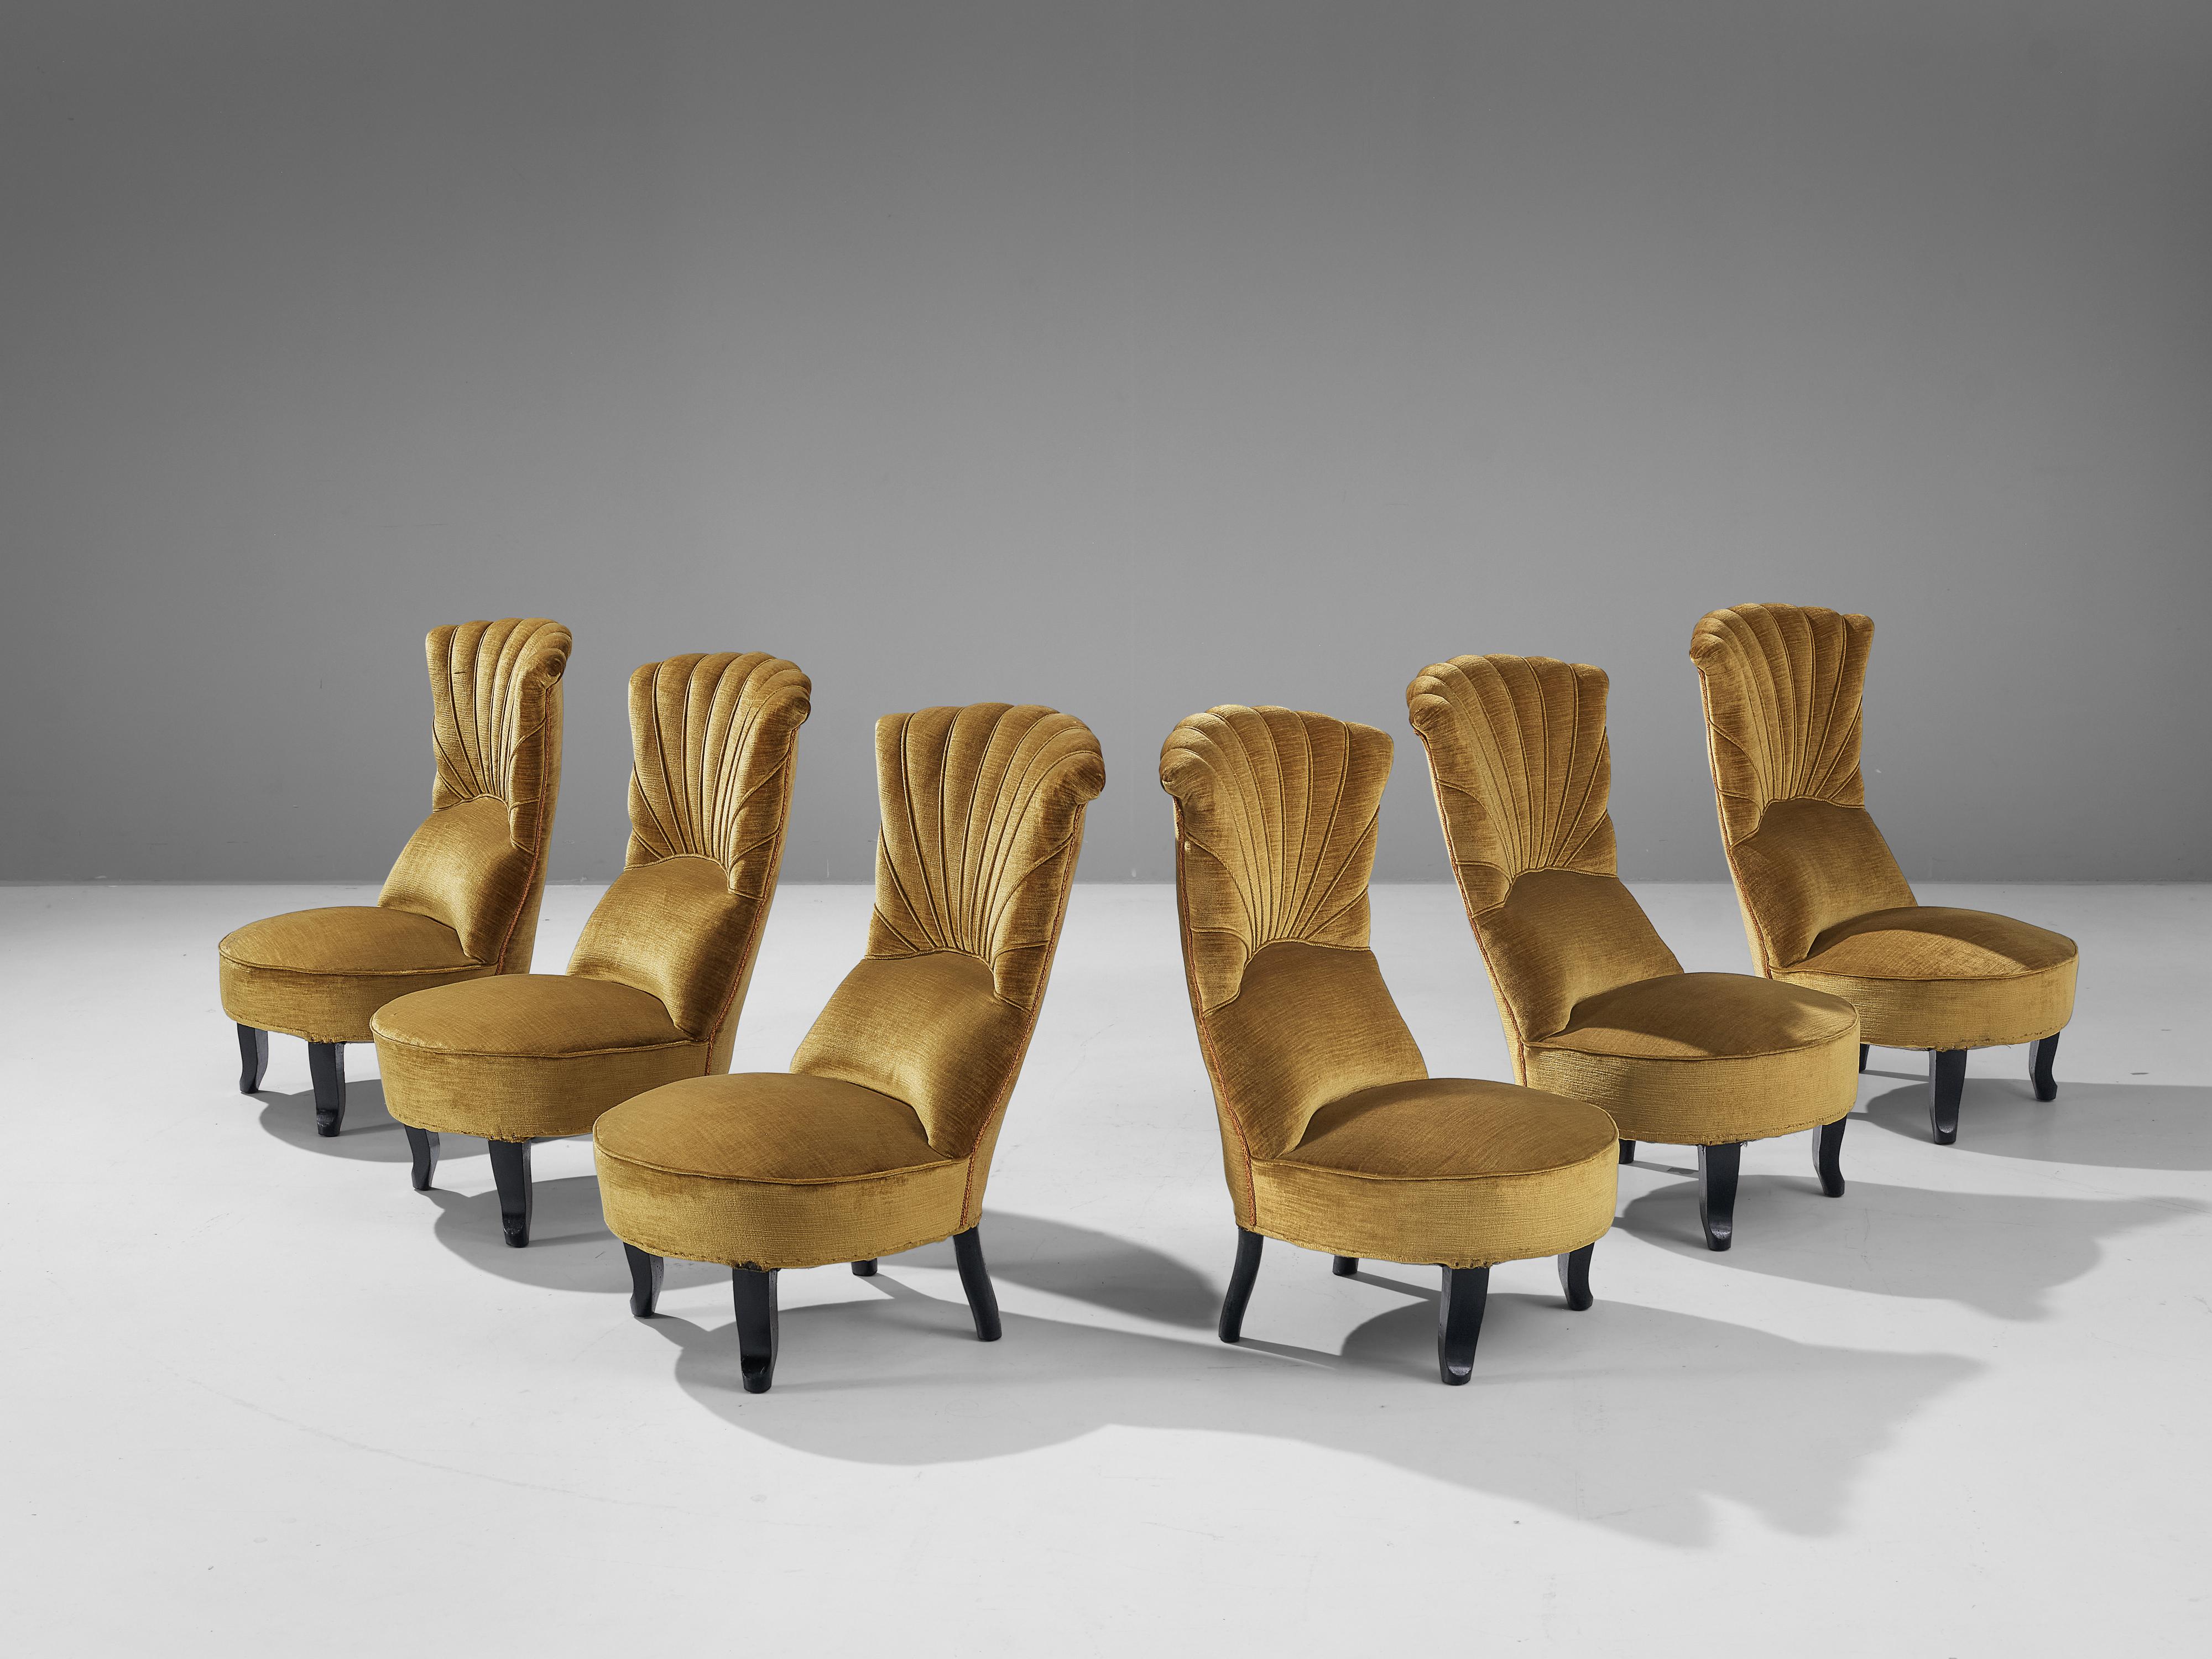 Side chairs, velours, wood, France, 1930s

Elegant pair of Art Deco chairs. The seating of the chairs is upholstered in a classy mustard velours, adding to the aesthetic of the chair. The backrest has a beautiful decoration that is reminiscent of